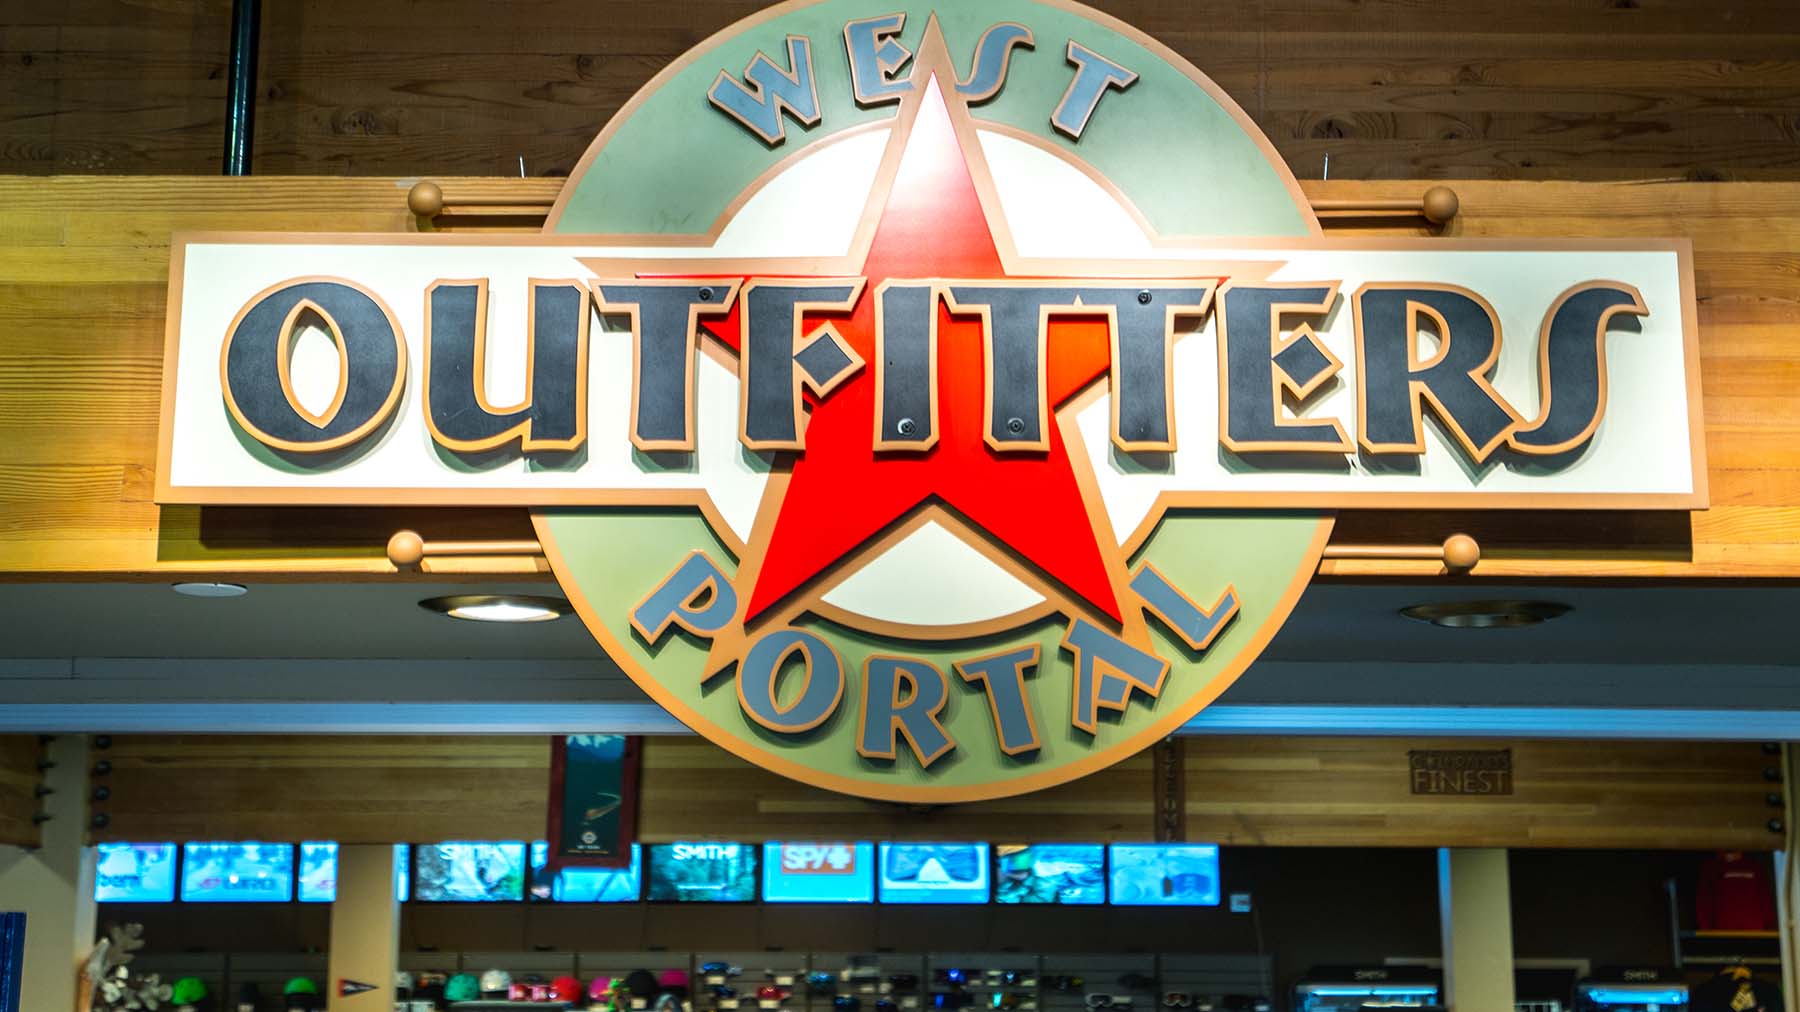 West Portal Outfitters